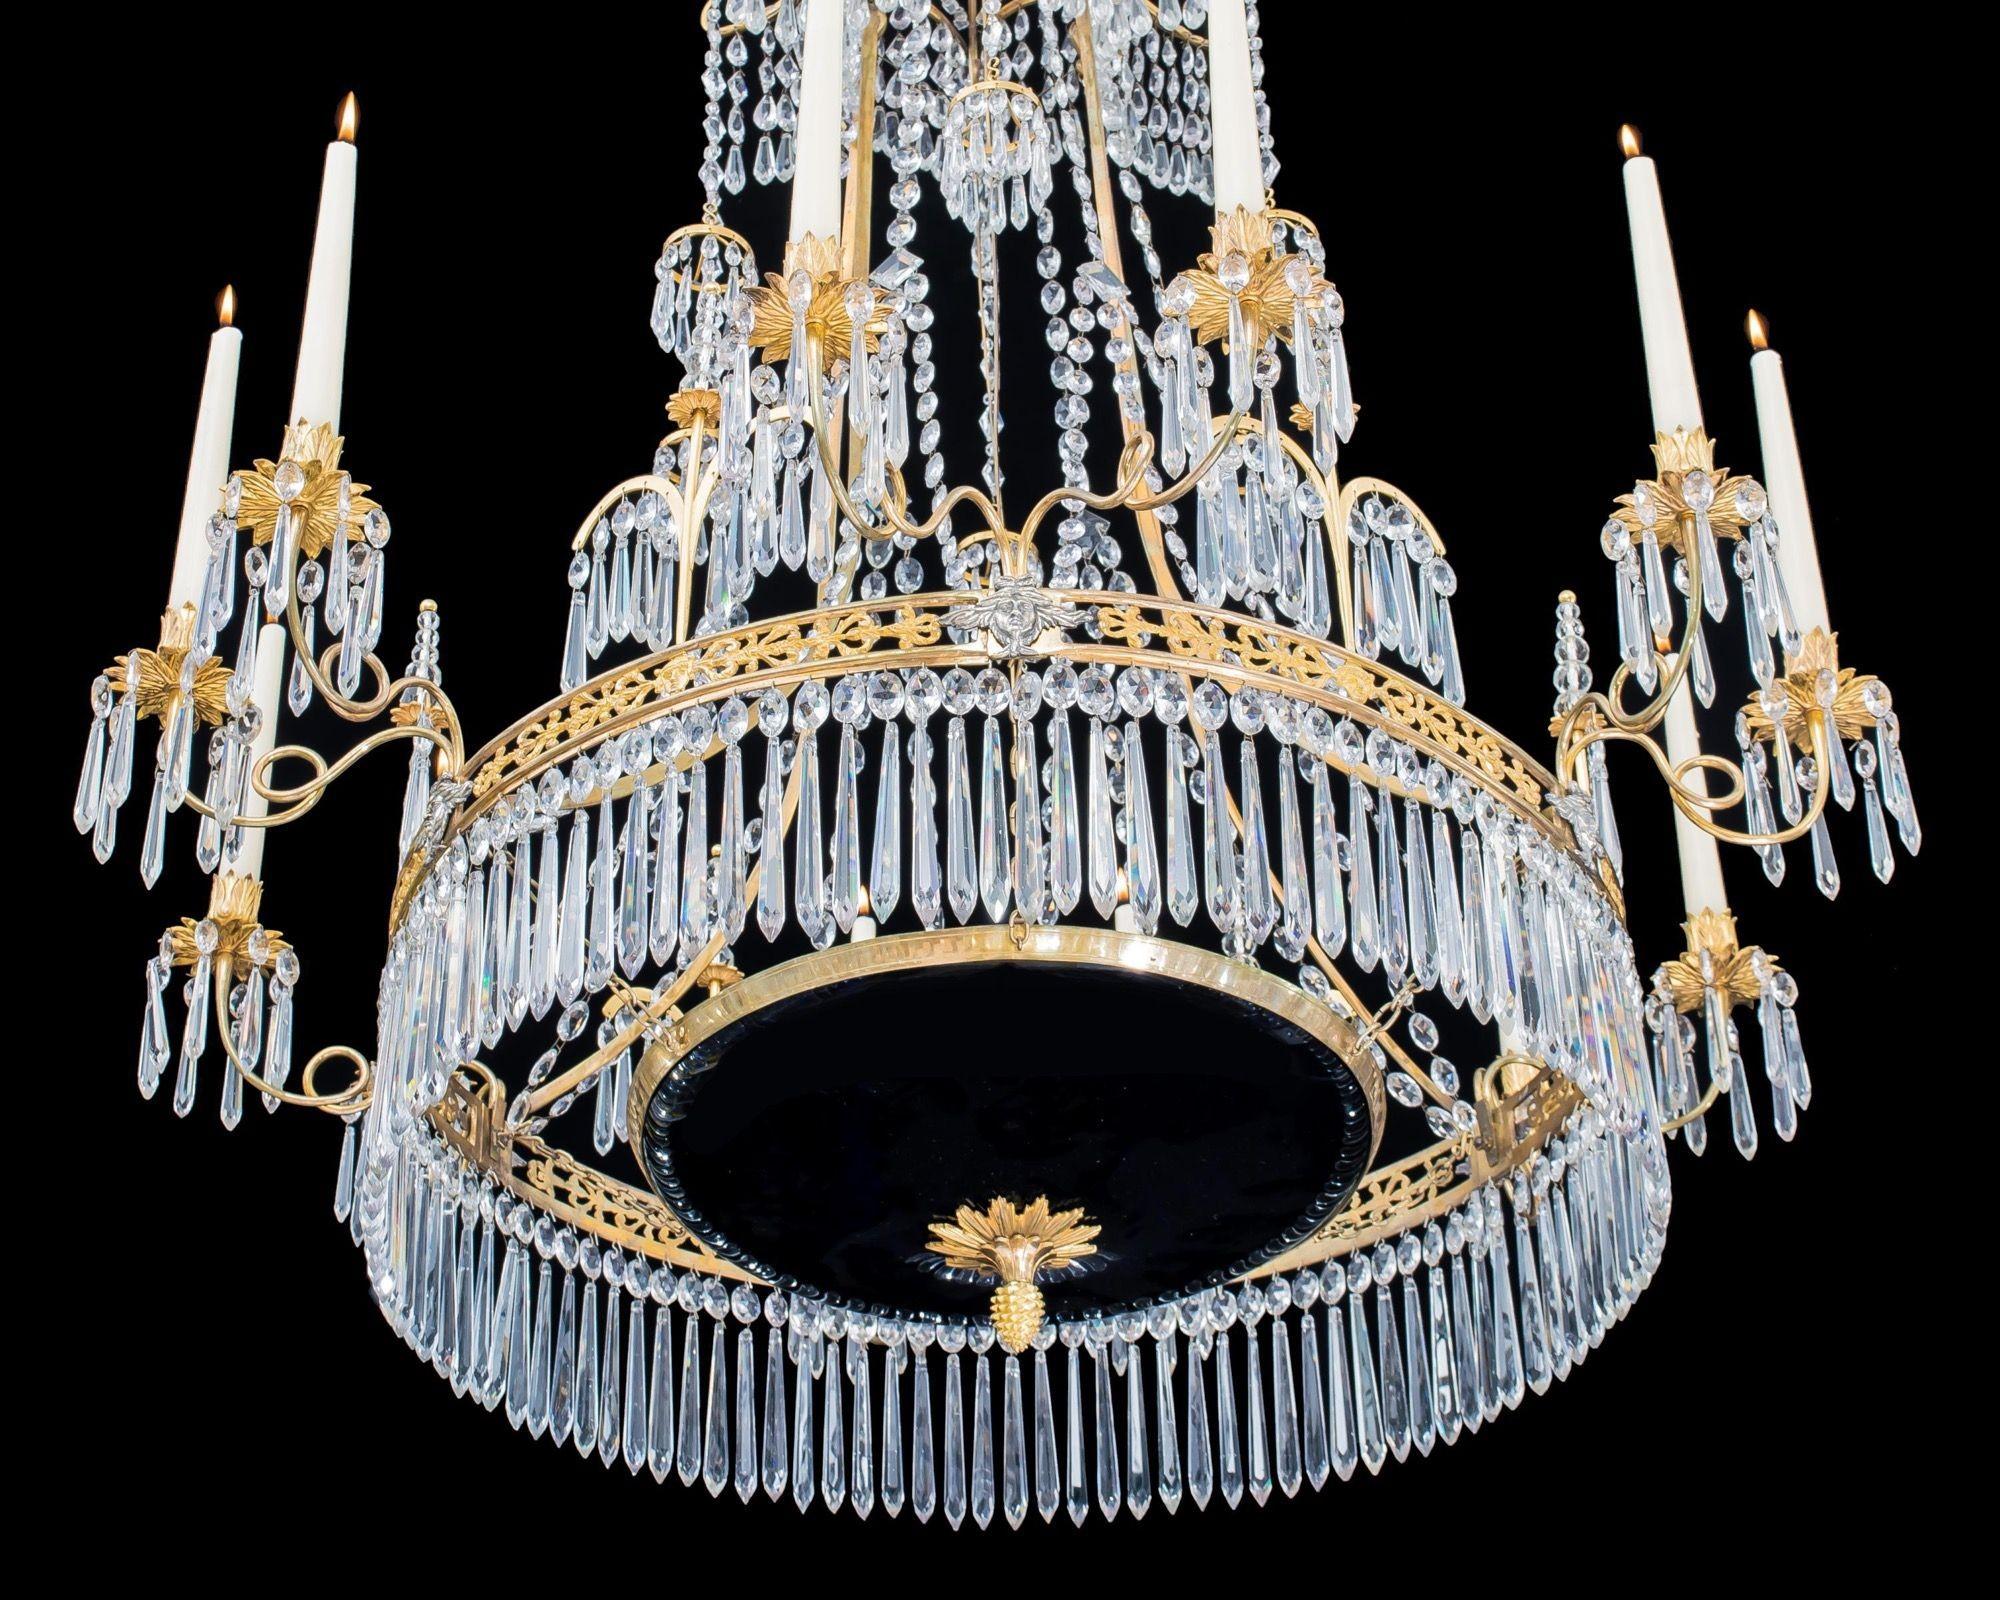 A German Neoclassical Silver And Gilt Bronze Twelve Light Crystal Chandelier  In Good Condition For Sale In Steyning, West sussex